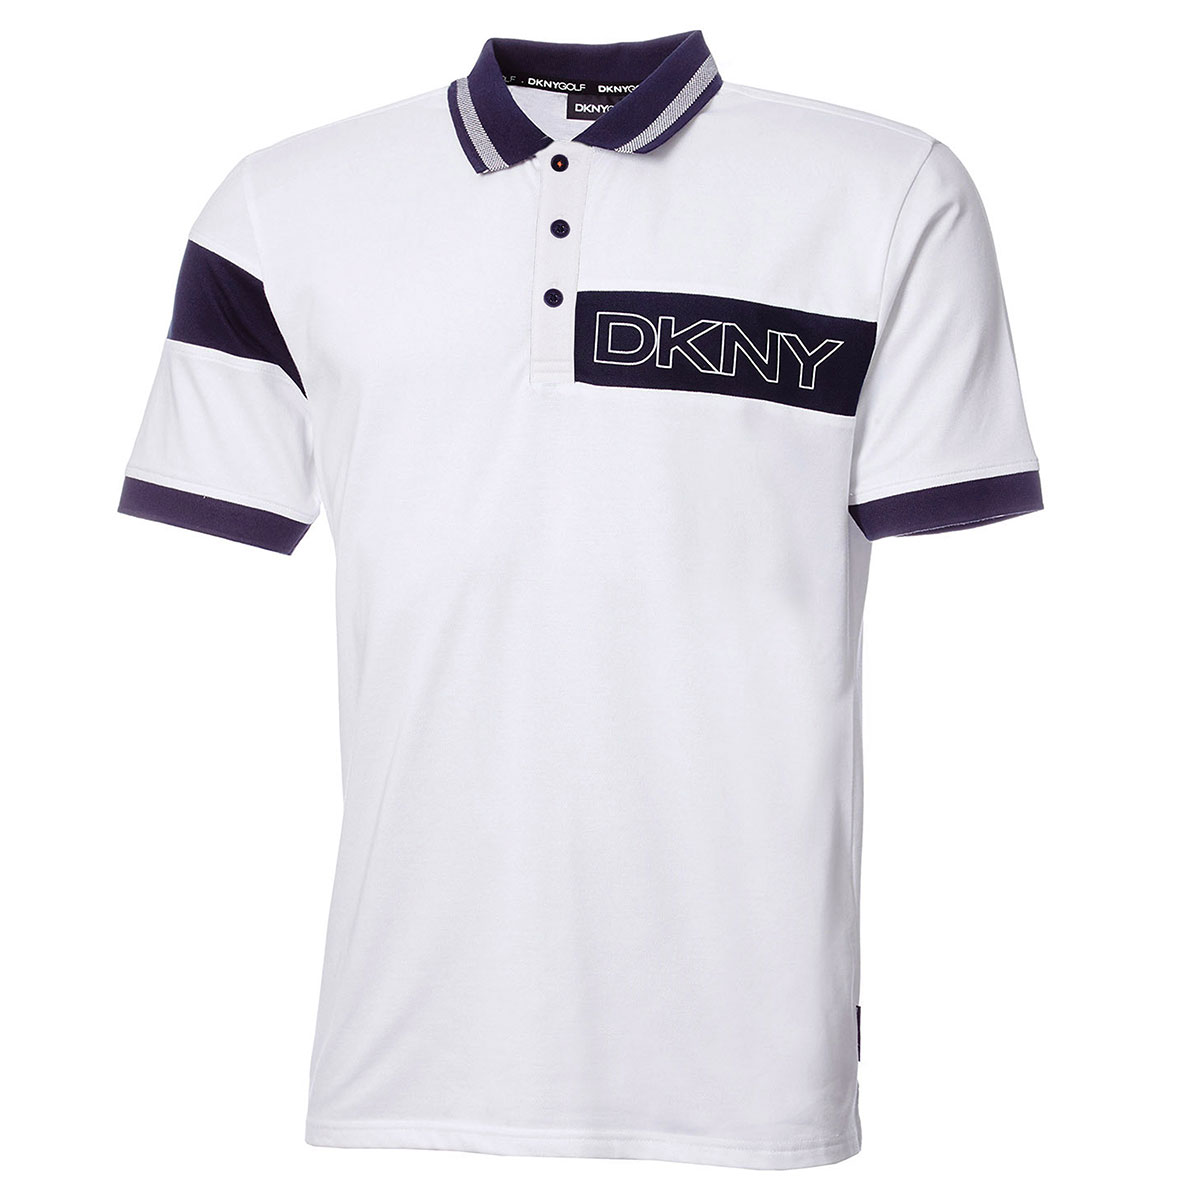 DKNY Men's Sunset Park Stretch Golf Polo Shirt from american golf